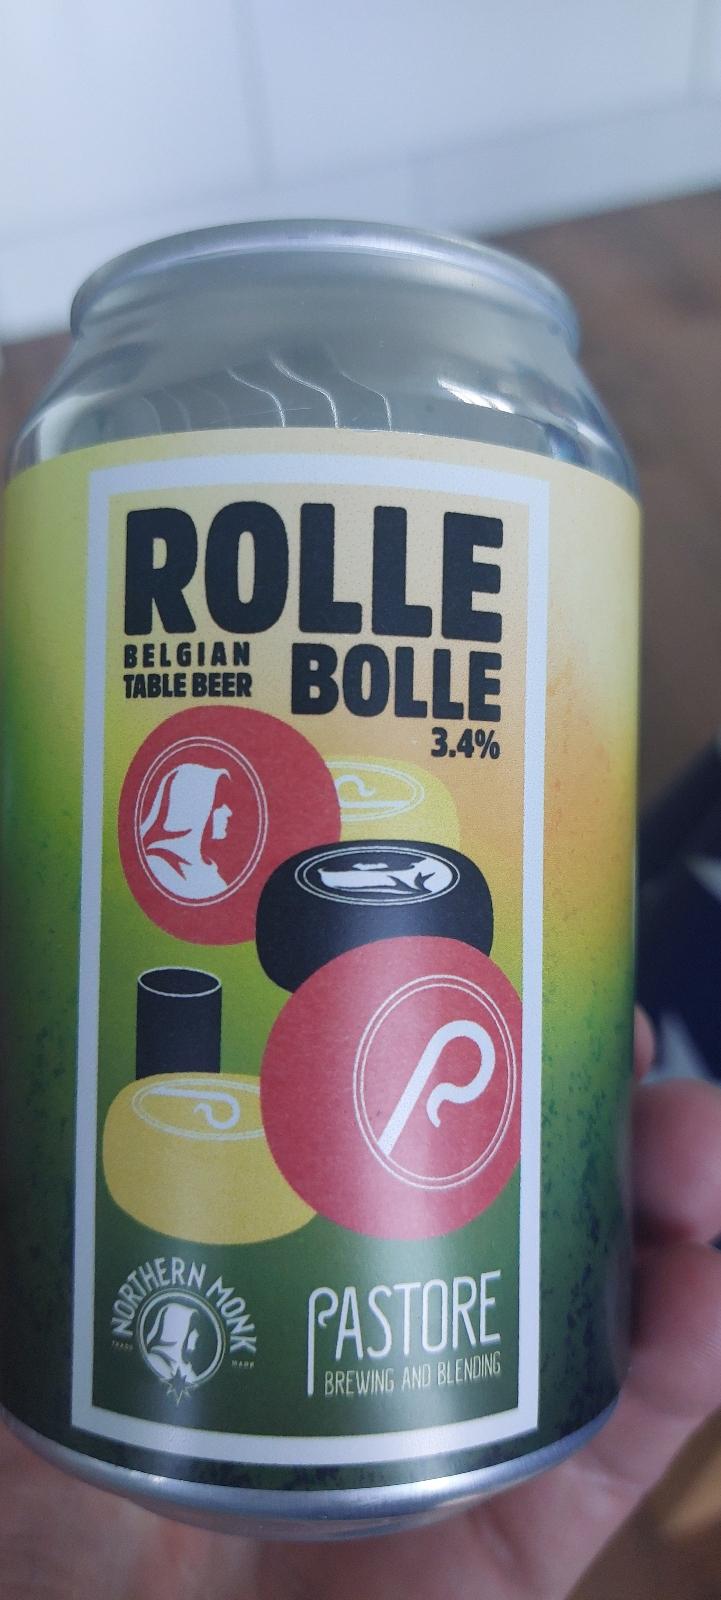 Rolle Bolle (Collaboration with Pastore Brewing and Blending)